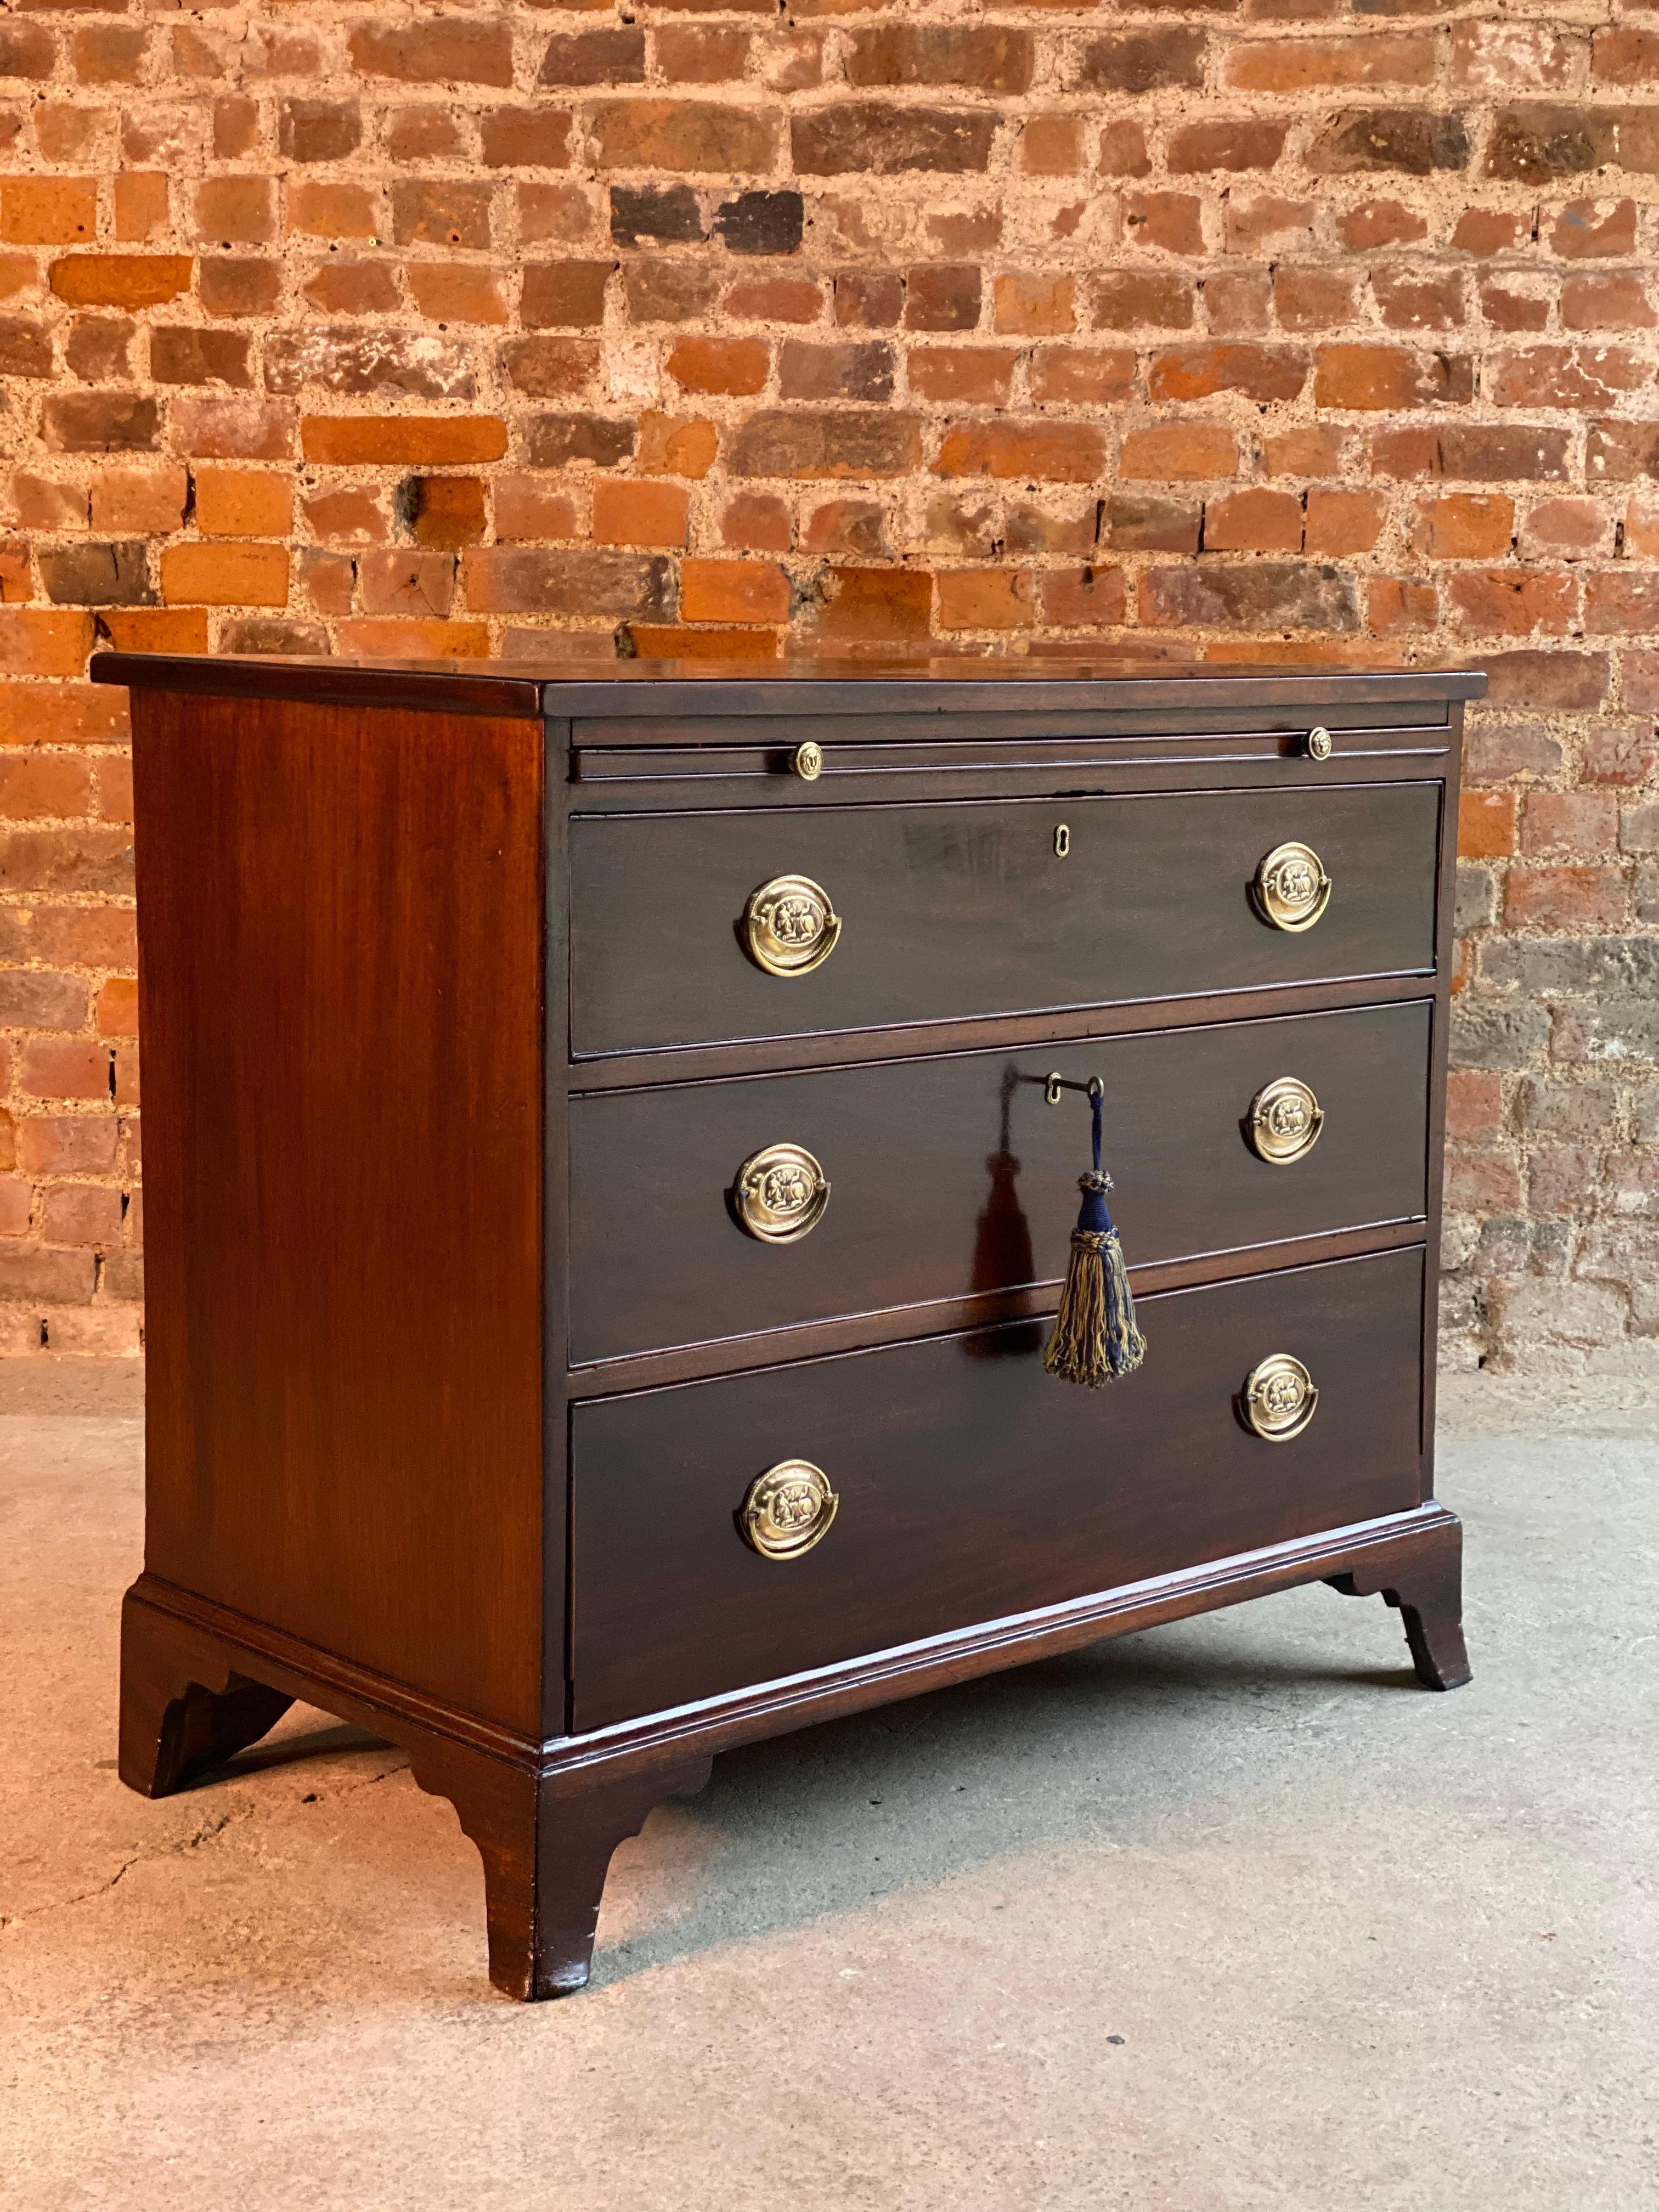 Antique George III mahogany bachelor’s chest of drawers 19th century, circa 1830

Early 19th century George III mahogany bachelor’s chest of drawers circa 1830, the rectangular top with shaped moulded edge, over three graduated drawers with hand